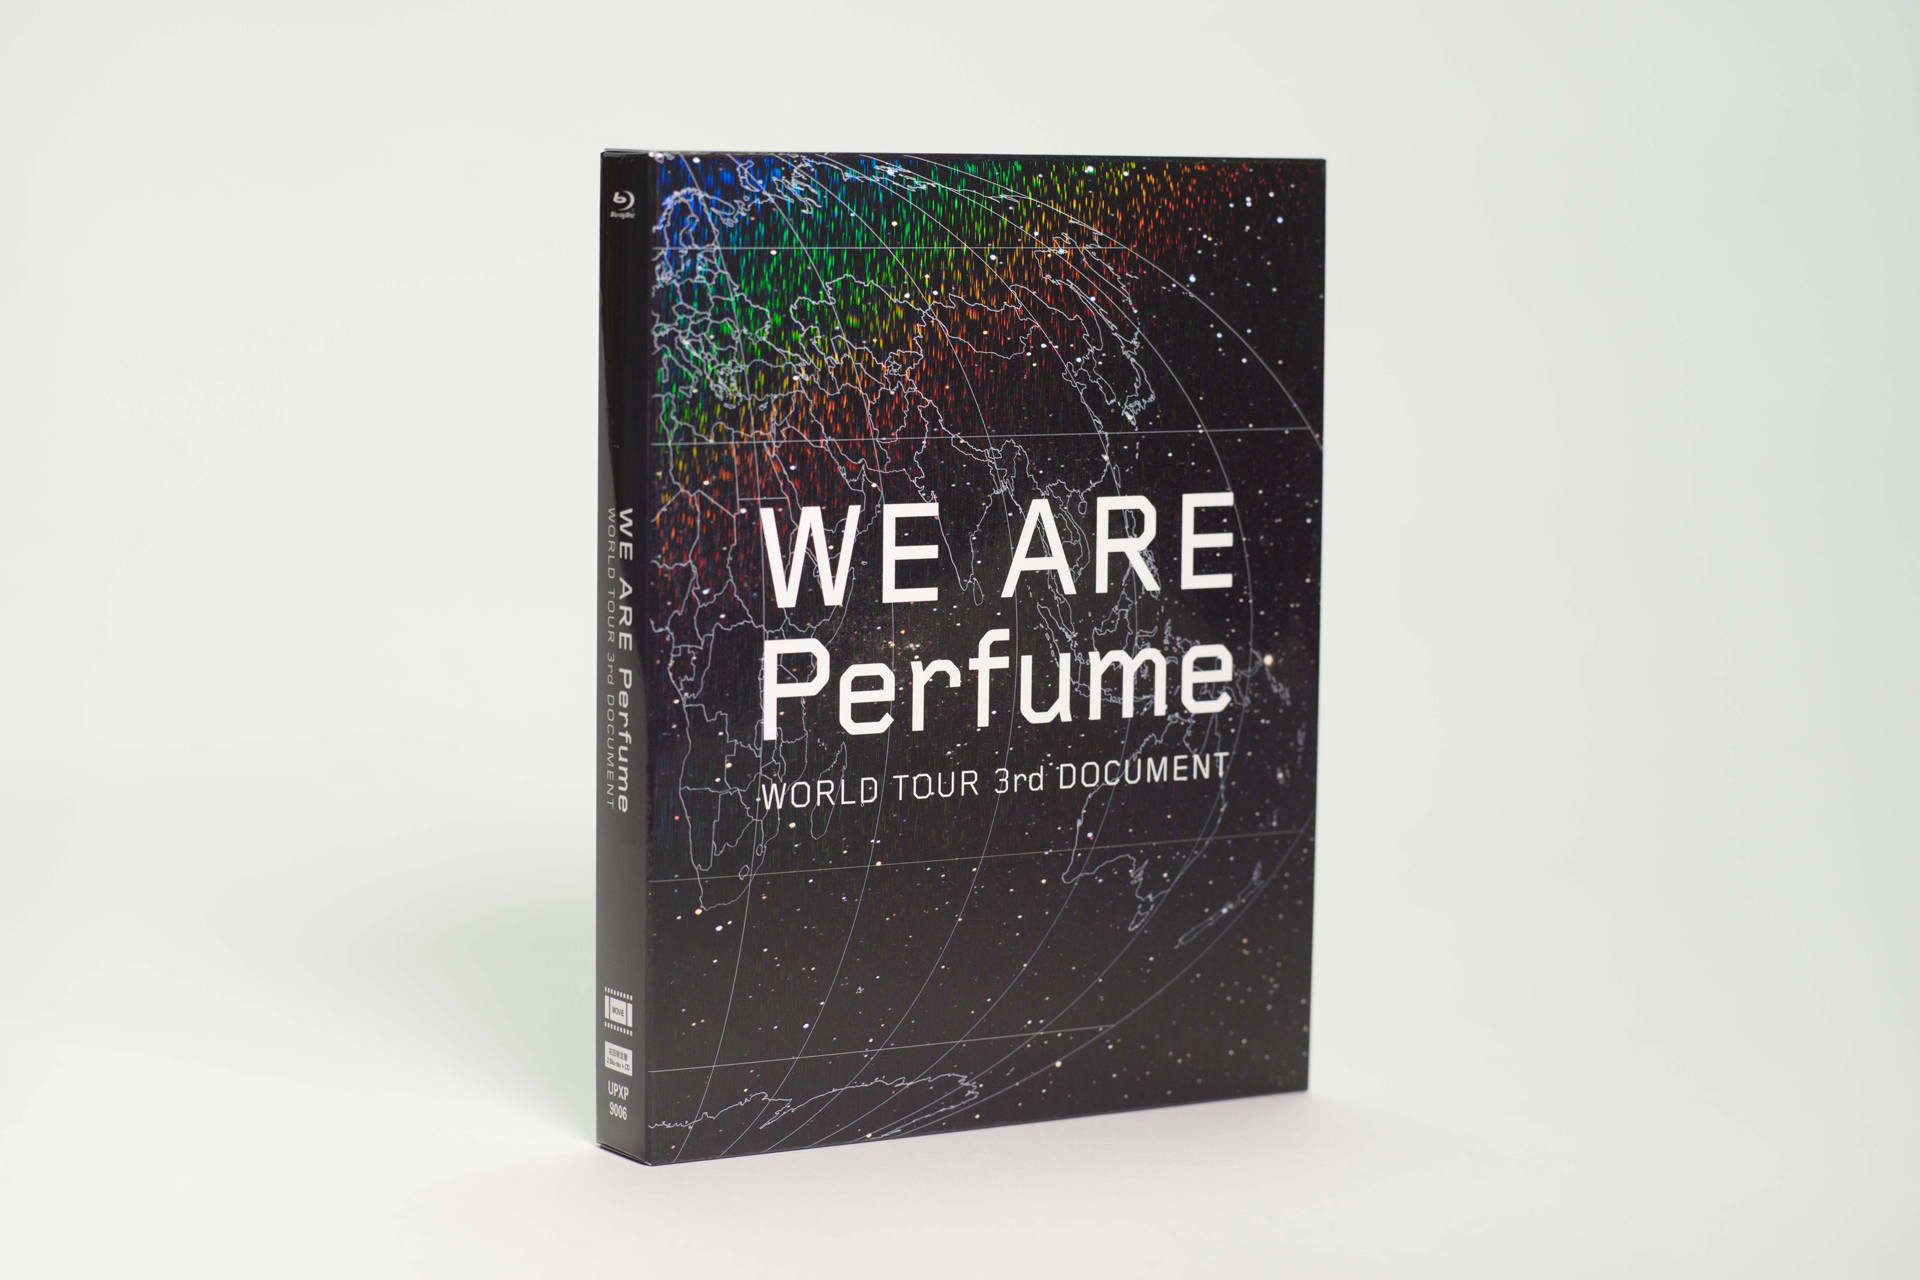 WE ARE Perfume -WORLD TOUR 3rd DOCUMENT Blu-ray,DVD